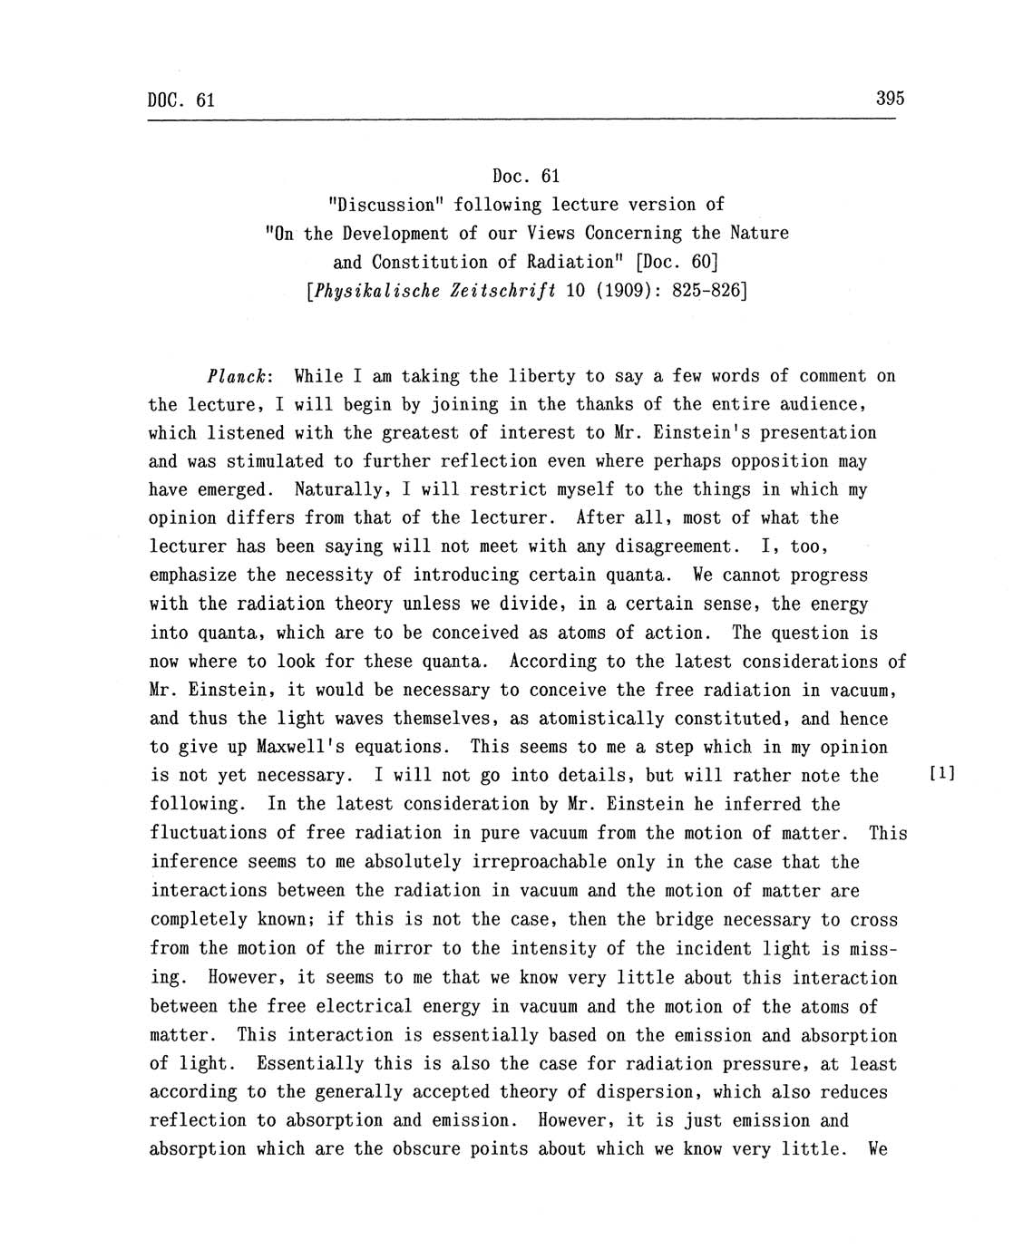 Volume 2: The Swiss Years: Writings, 1900-1909 (English translation supplement) page 395